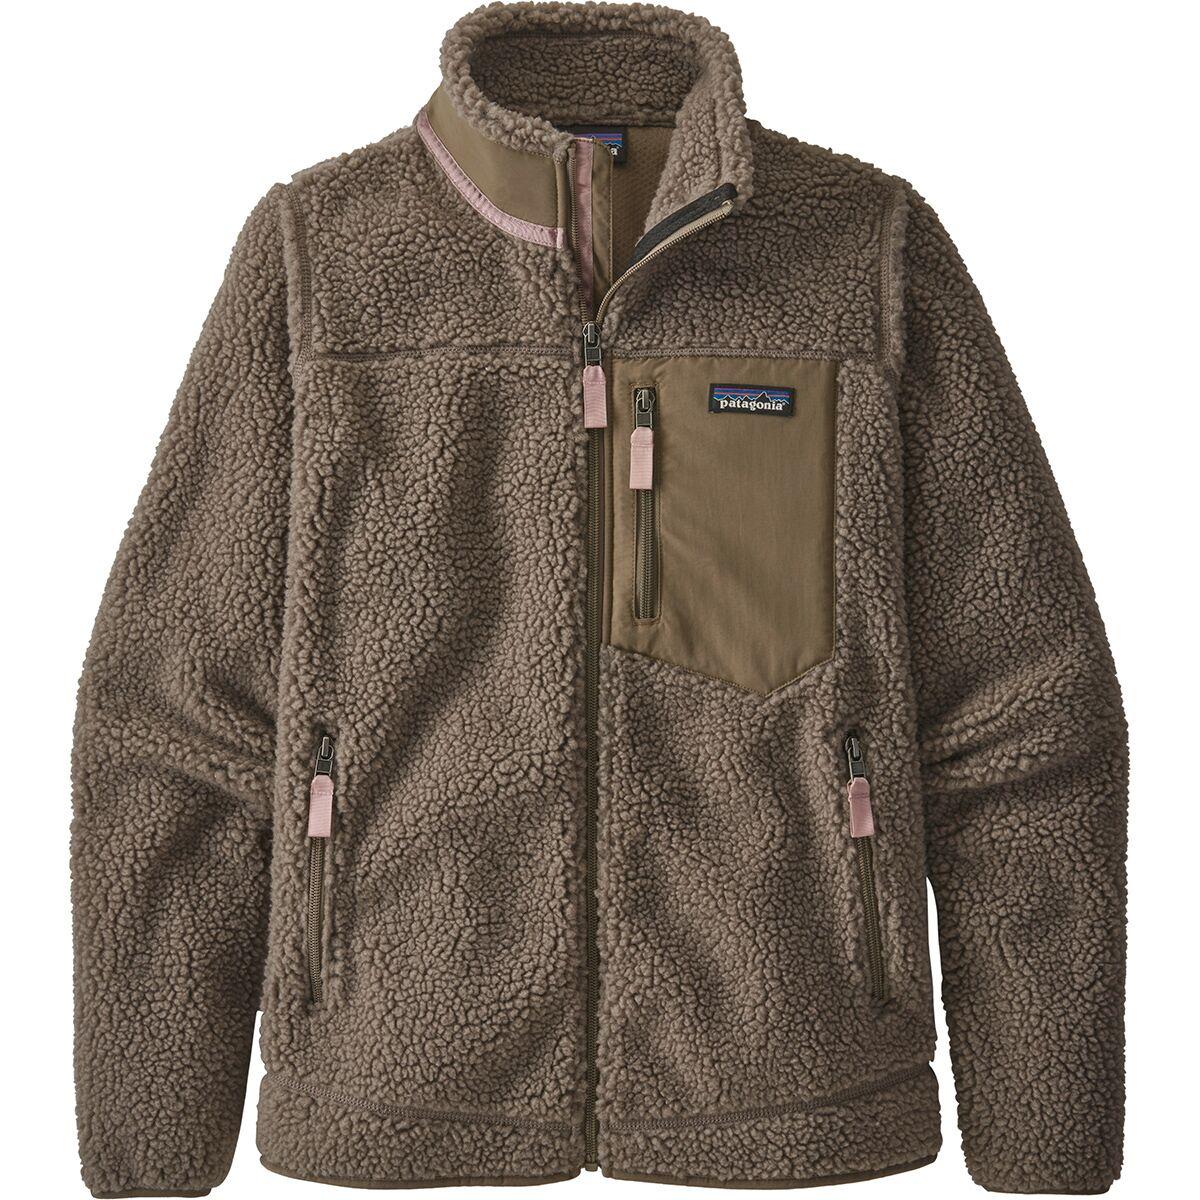 Patagonia Classic Retro-x Fleece Jacket in Brown - Lyst